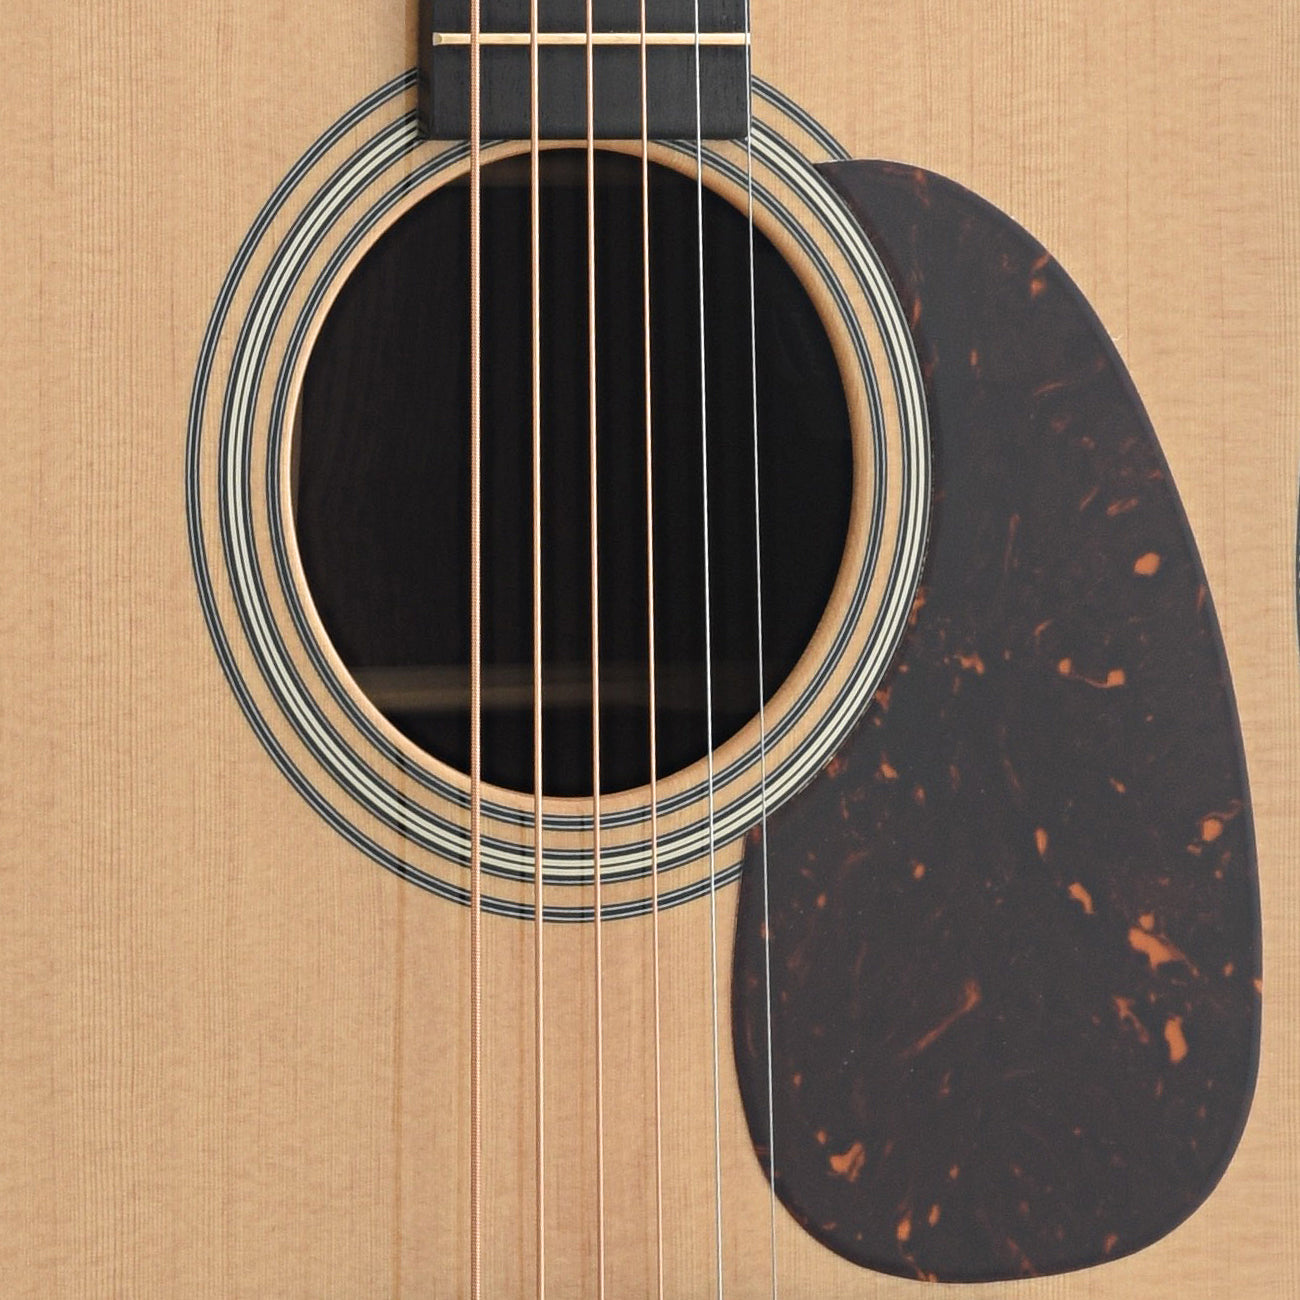 Soundhole and Pickguard of Martin D-28E Modern Deluxe Guitar